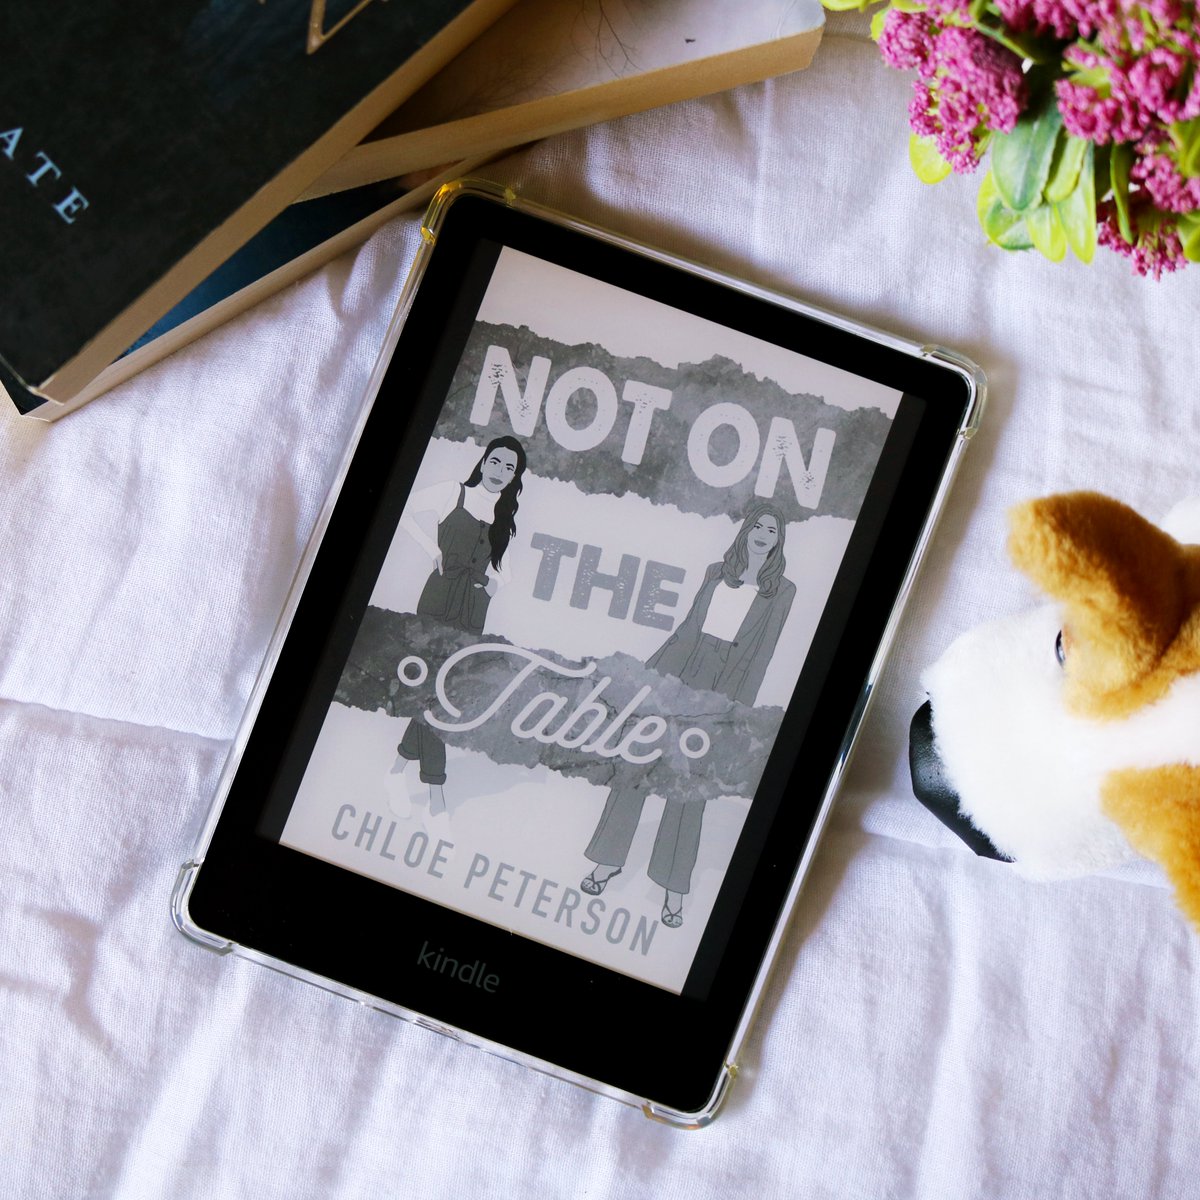 📚new post📚
NOT ON THE TABLE | BOOK REVIEW
When you’ve given up on love and suddenly find yourself snowed-in with the one… 👩‍❤️‍💋‍👩 

🔗 READ: bit.ly/Review-NotOnTh…

#ChloePeterson #sapphic #sapphicromance #bookblogger #bookreview #romancebooks